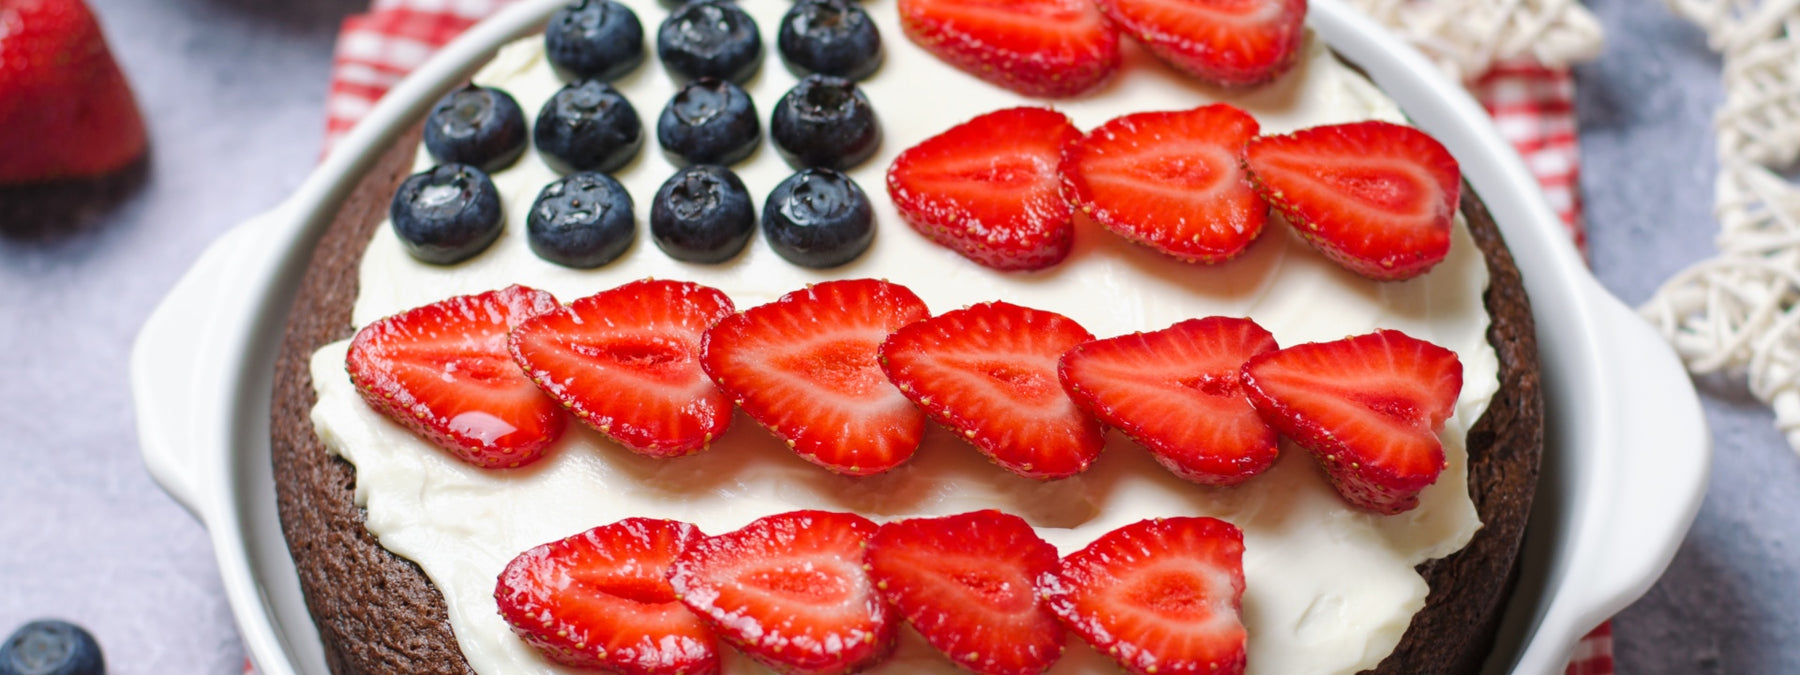 20 Patriotic Healthy Recipes for July 4th